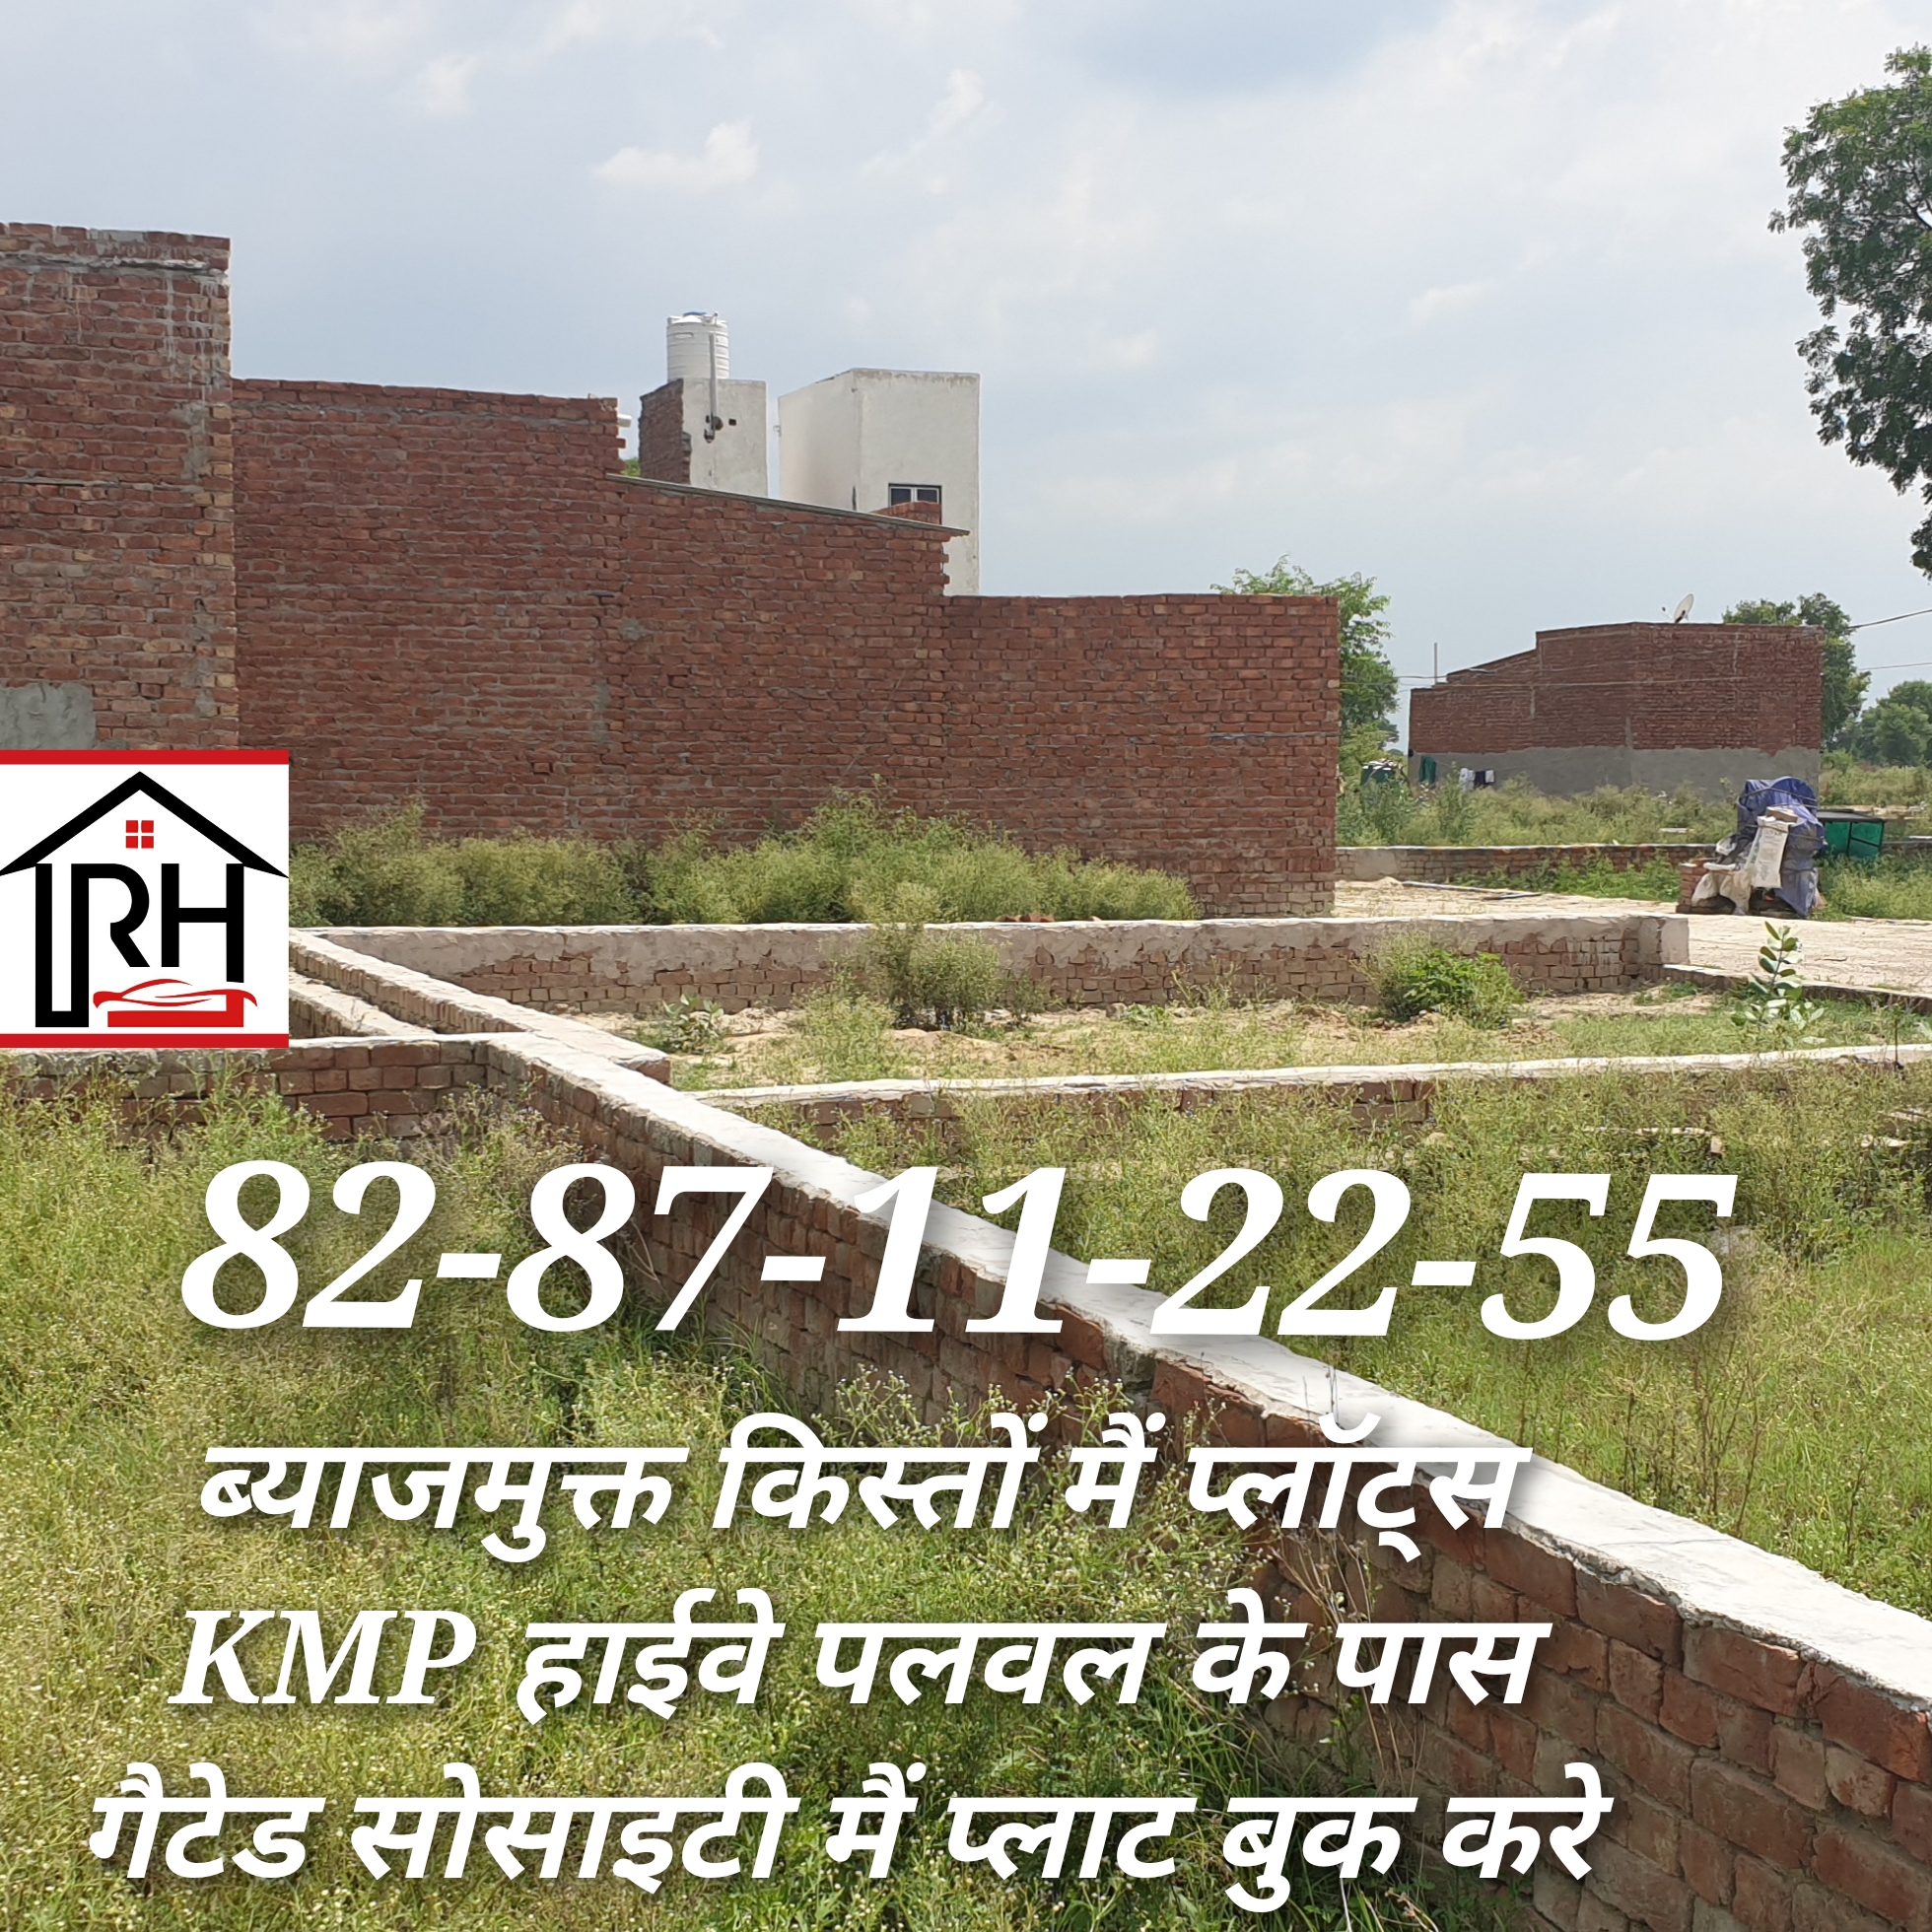 450 sqft Plots & Land for Sale in Okhla